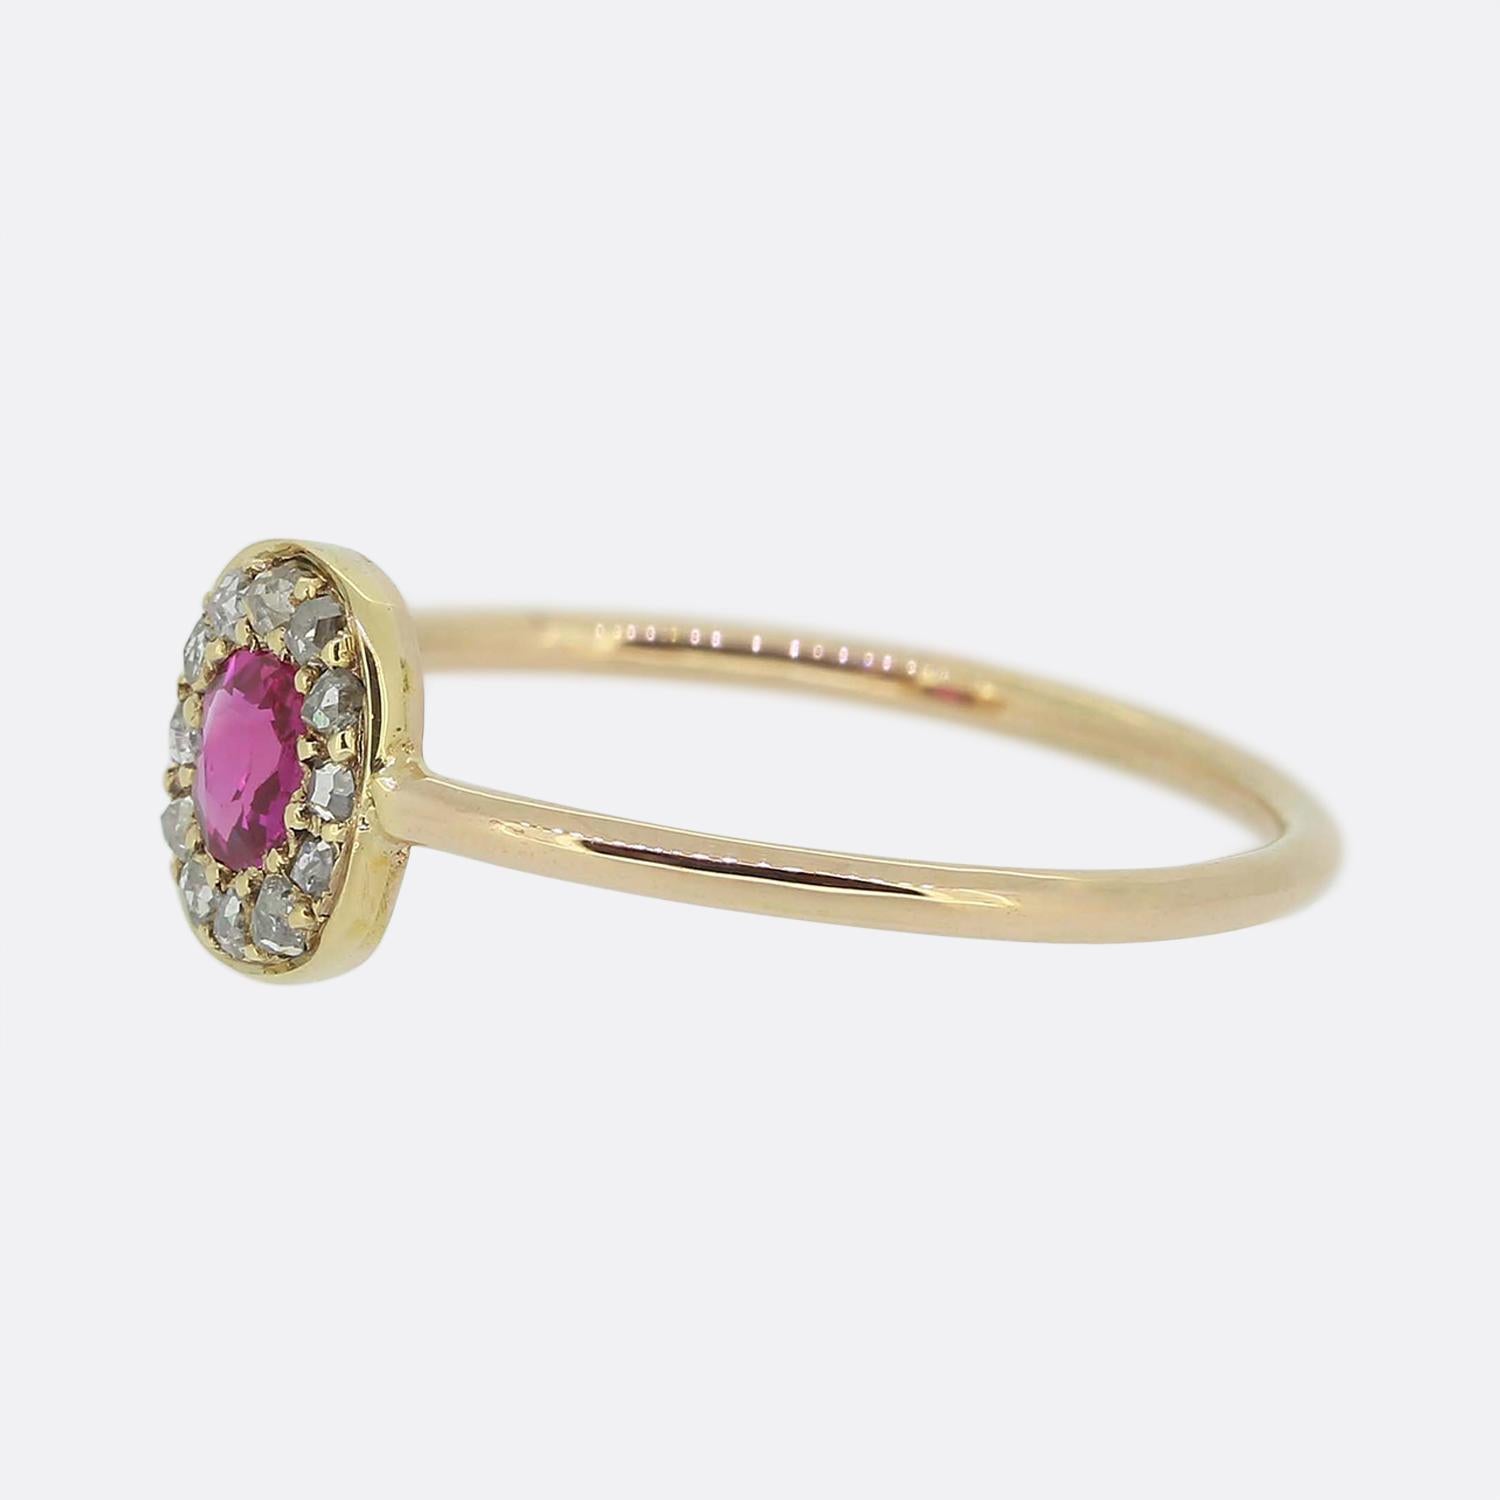 Here we have a charming ruby and diamond cluster ring. This piece has been crafted from a warm 18ct rose gold and showcases a single round faceted Burmese ruby possessing a vivid red colour with pinky undertone. This principal stone is then